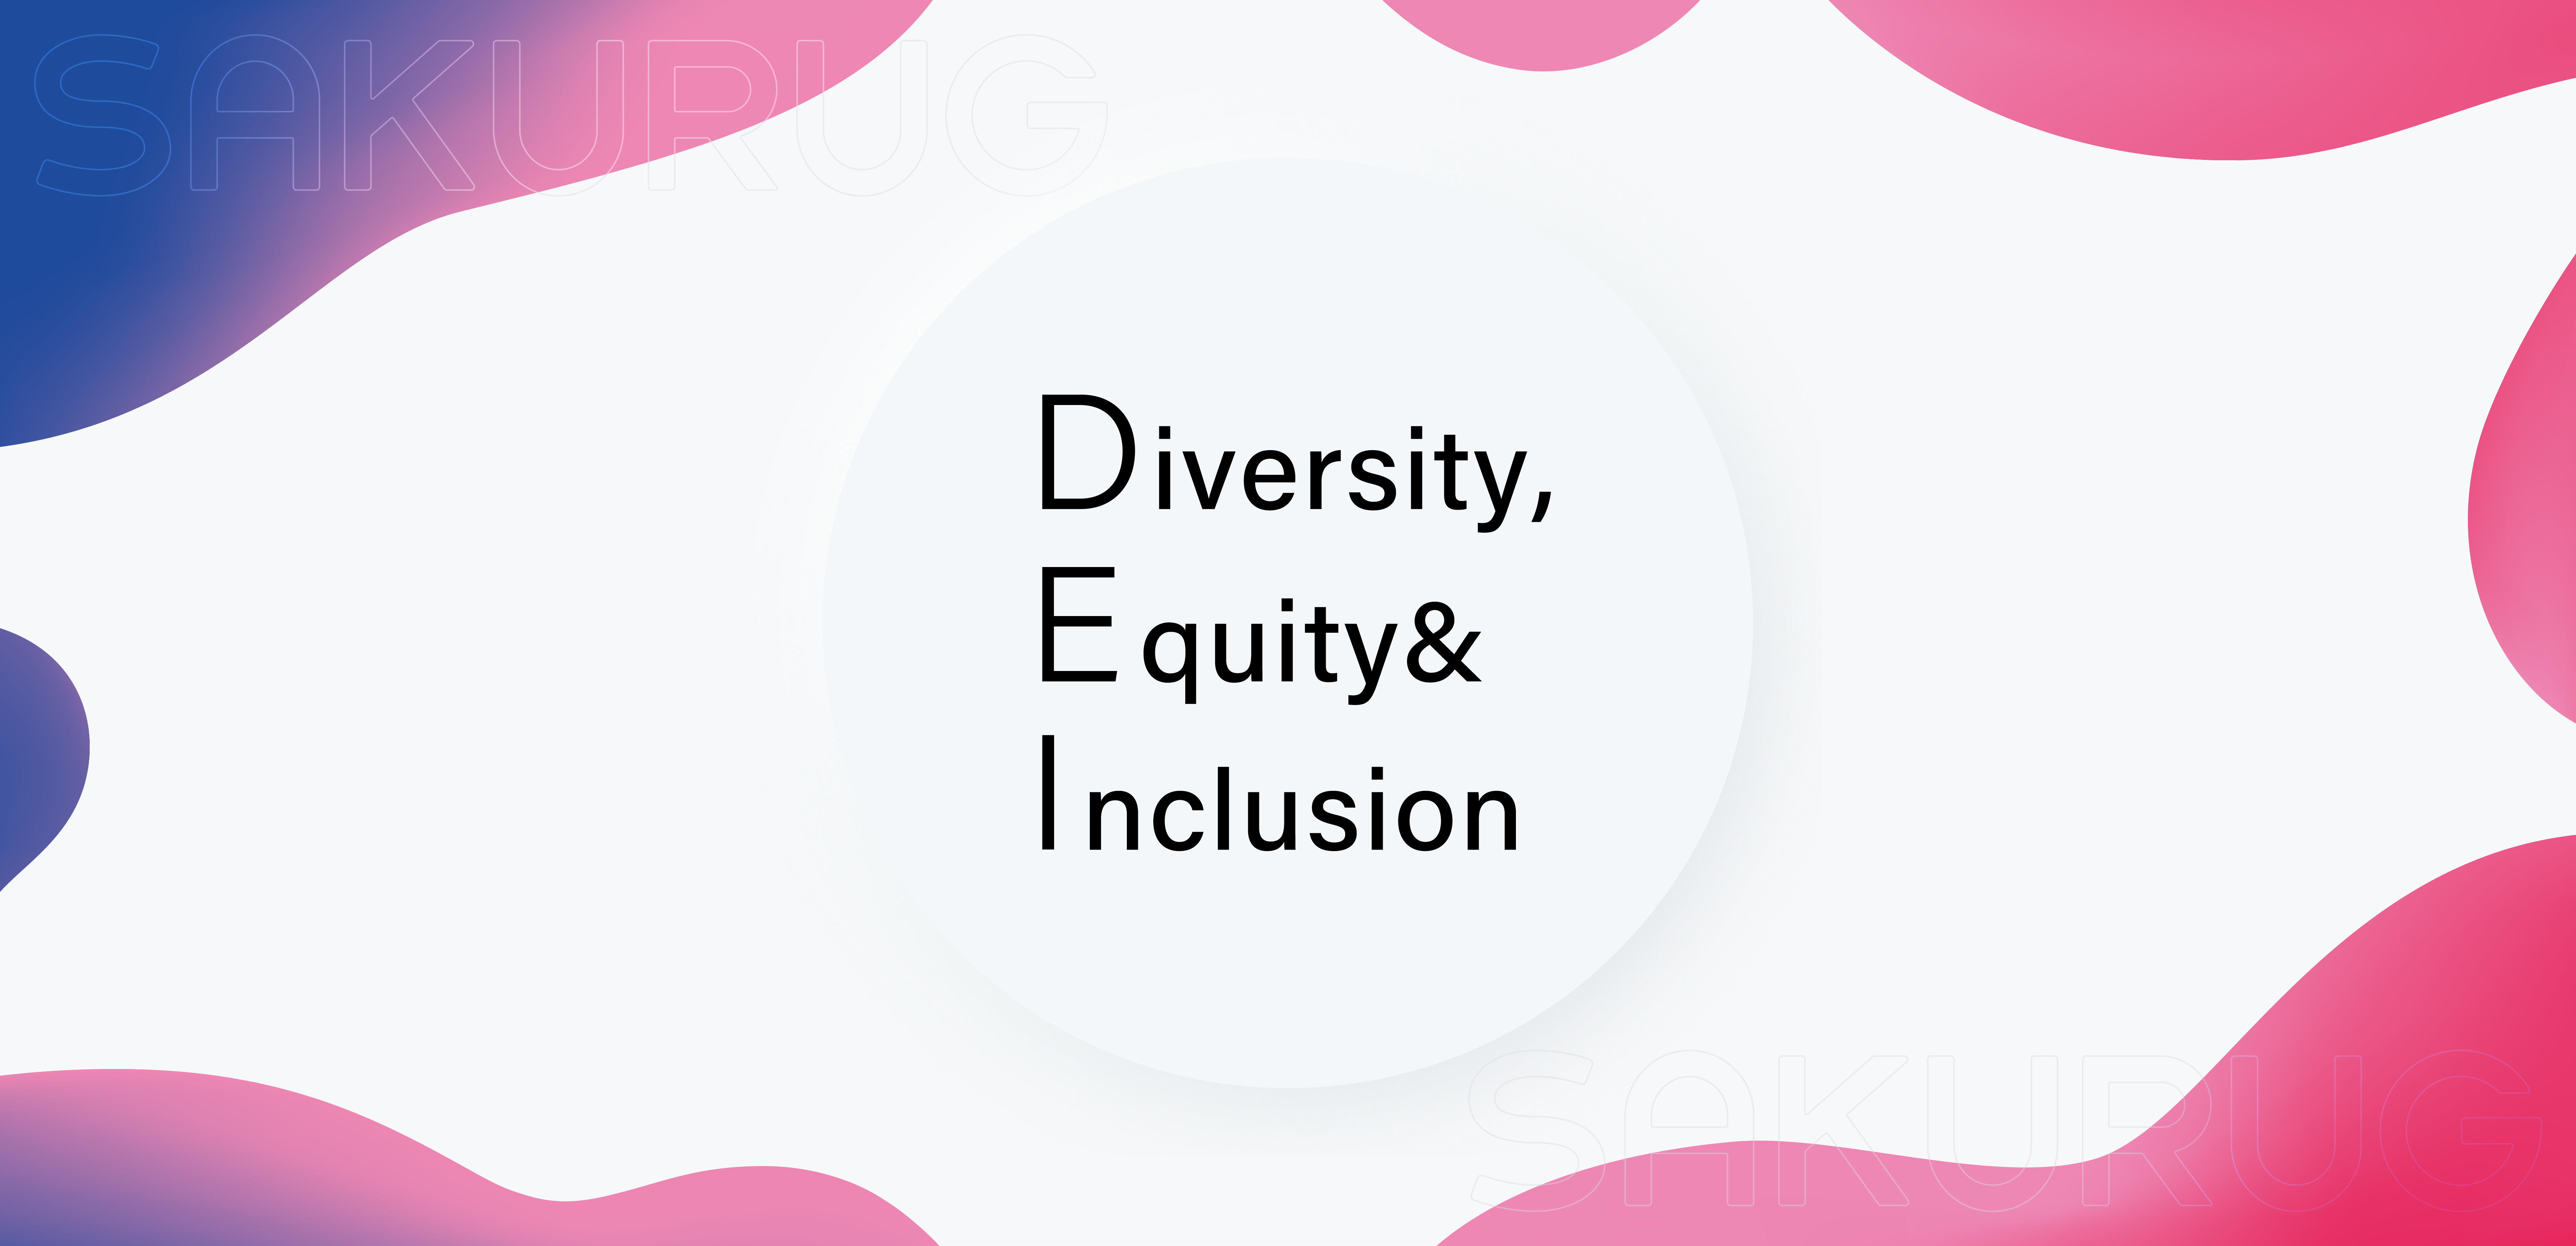 Diversity,Equity&Inclusion